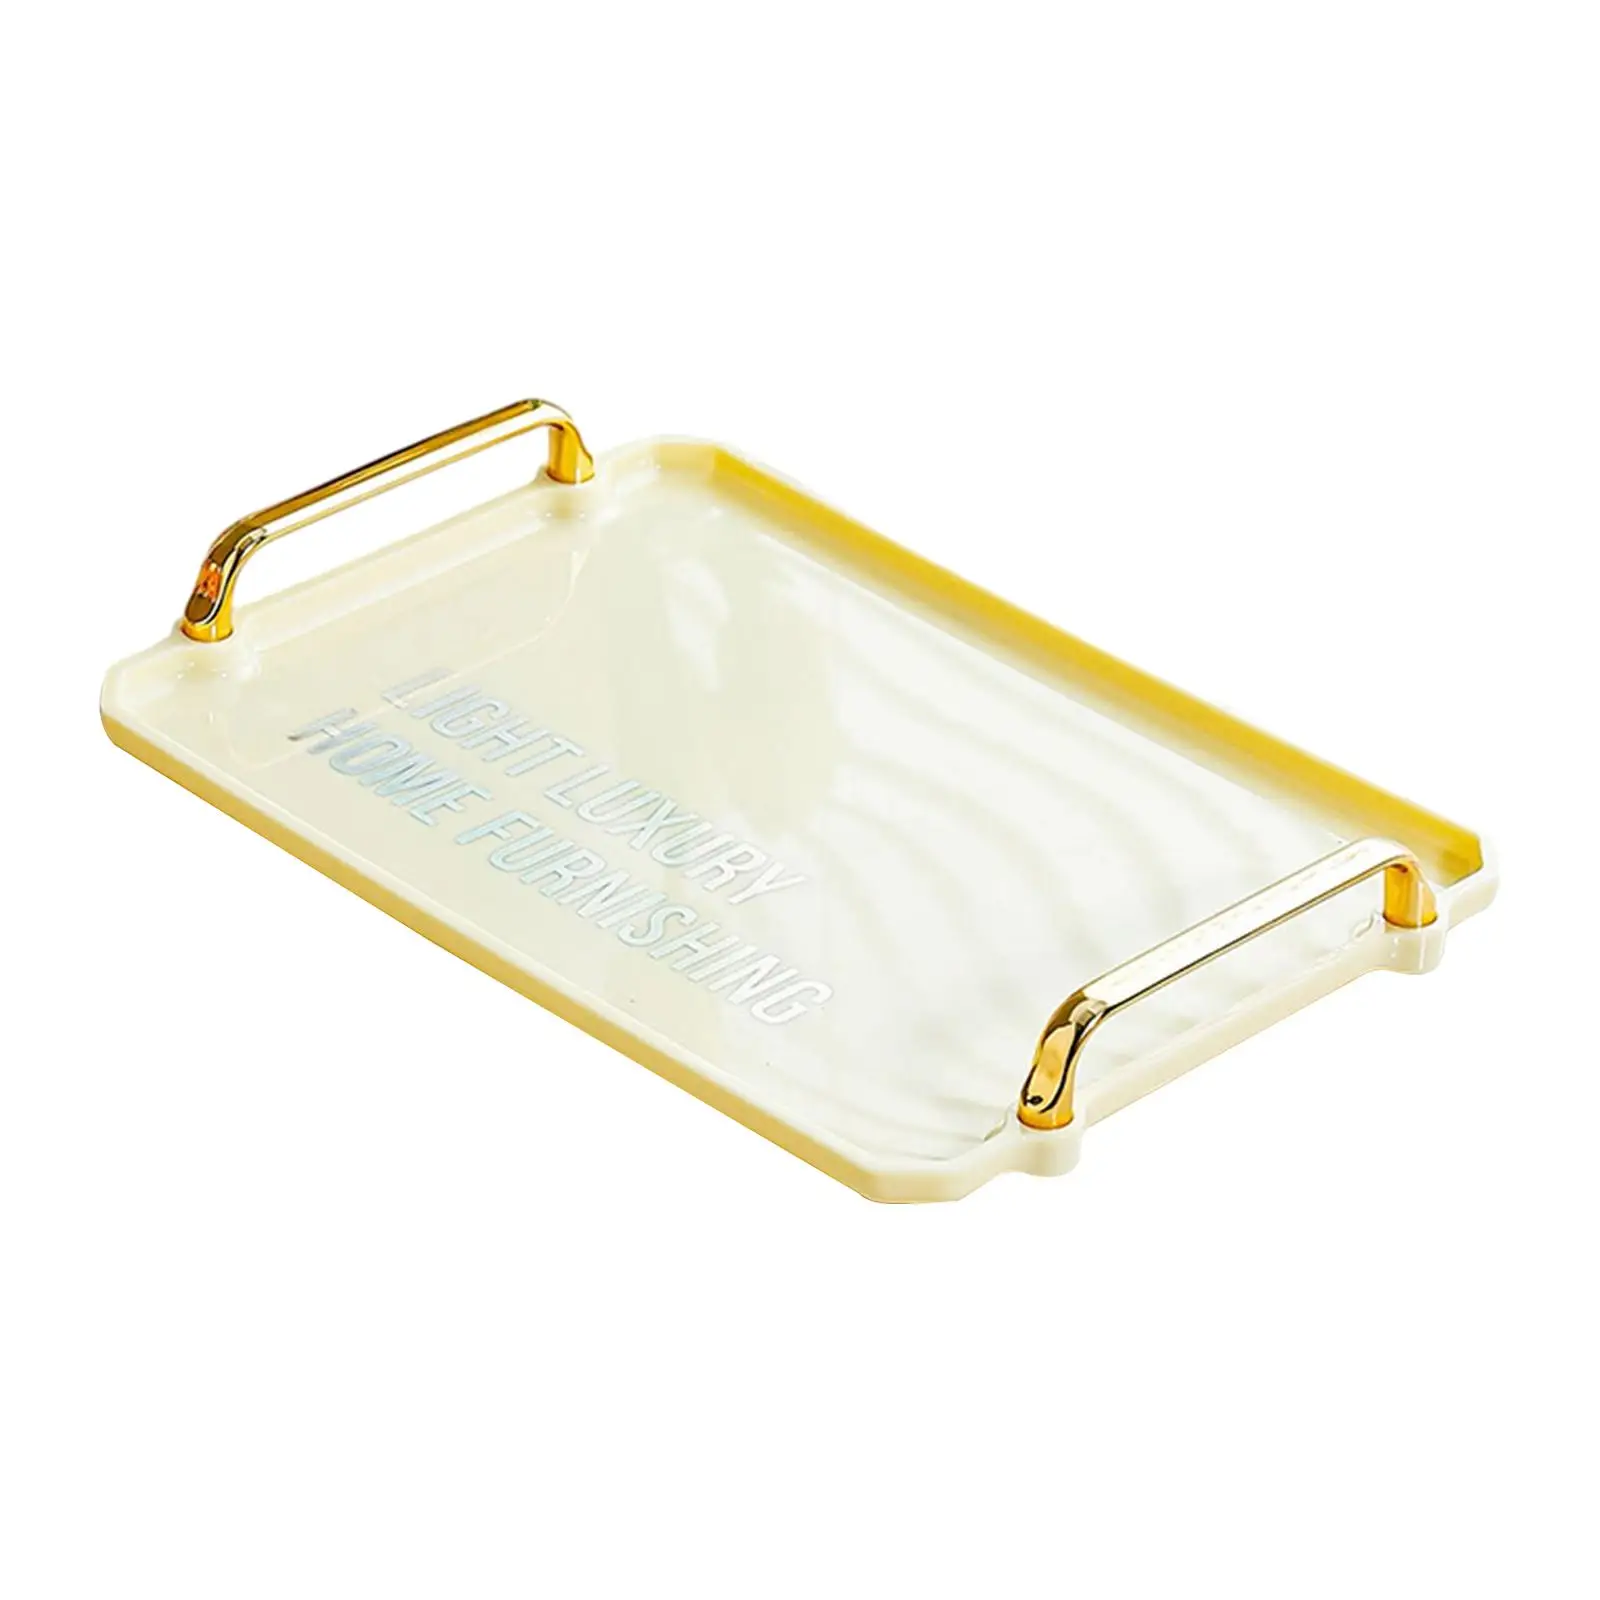 Serving Tray with Gold Handles Storage Multifunctional Practical Ottoman Tray for Party Bathroom Home Bathroom Vanity